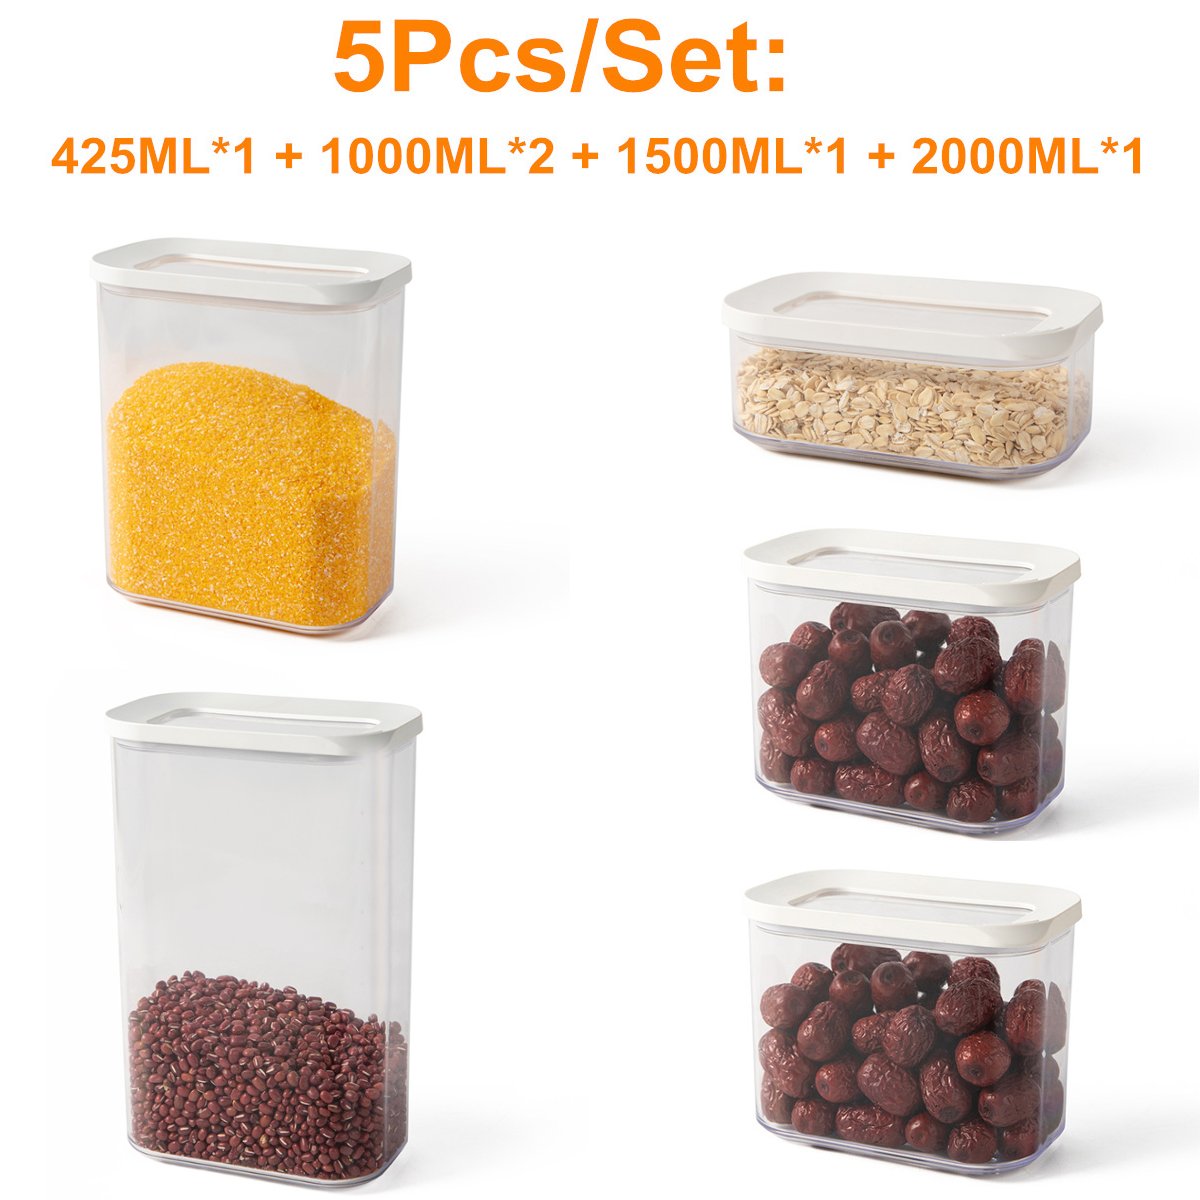 345Pcs-Airtight-Food-Storage-Containers-Kitchen-Canisters-Boxes-with-Lid-Set-1794081-4